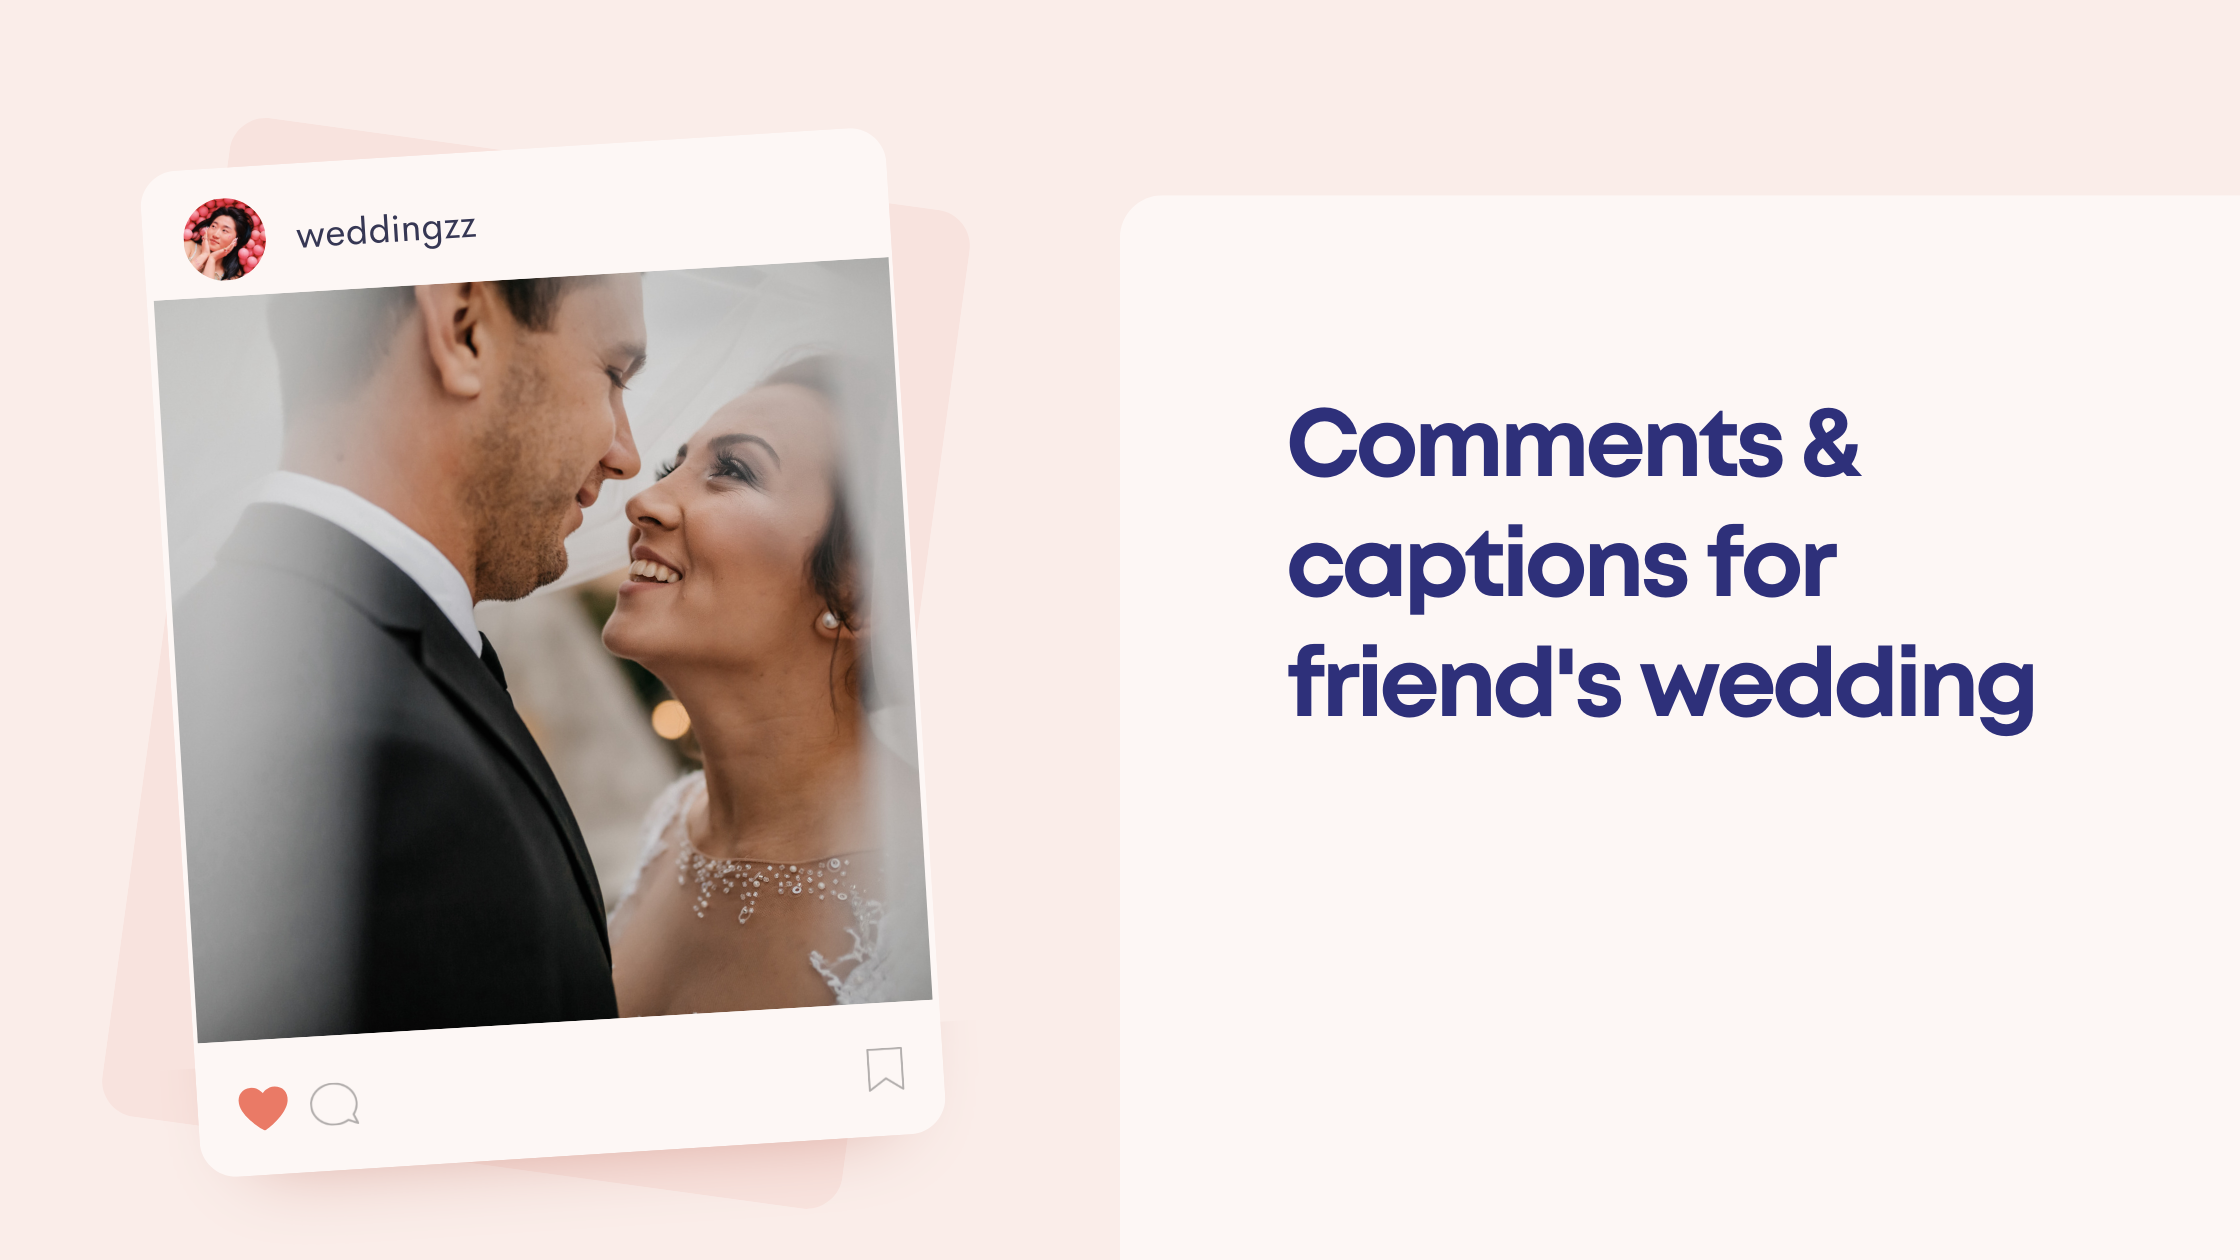 Remote.tools shares a list of comments and captions for friends wedding